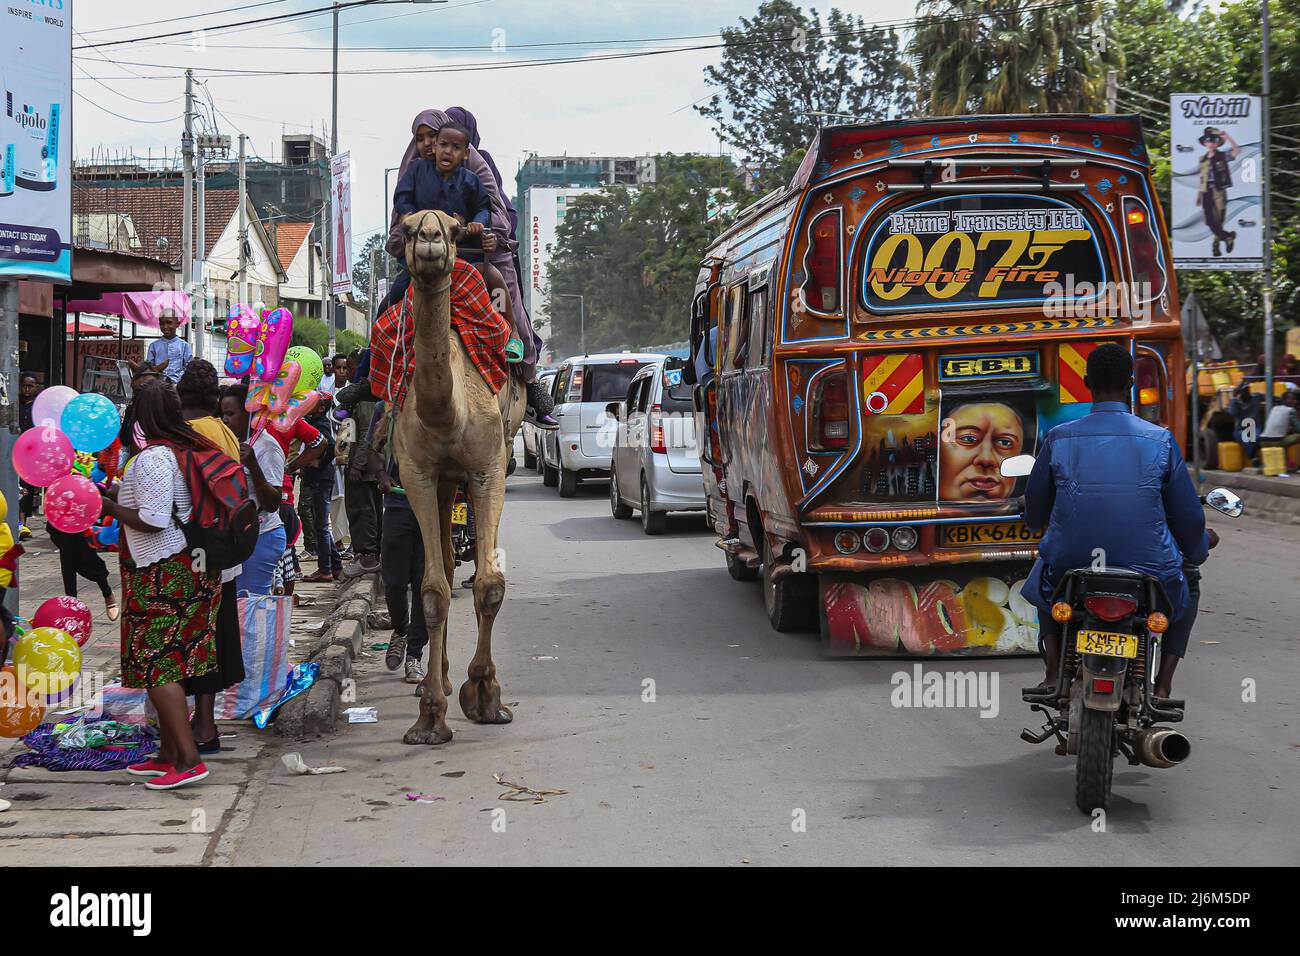 Kenyan Somali children enjoy a Carmel ride along Muratina road Eastleigh, during Eid-Ul-Fitr celebrations. Muslims in Kenya celebrate Eid-Ul-Fitr which marks the end of the Holy month of Ramadhan. Stock Photo